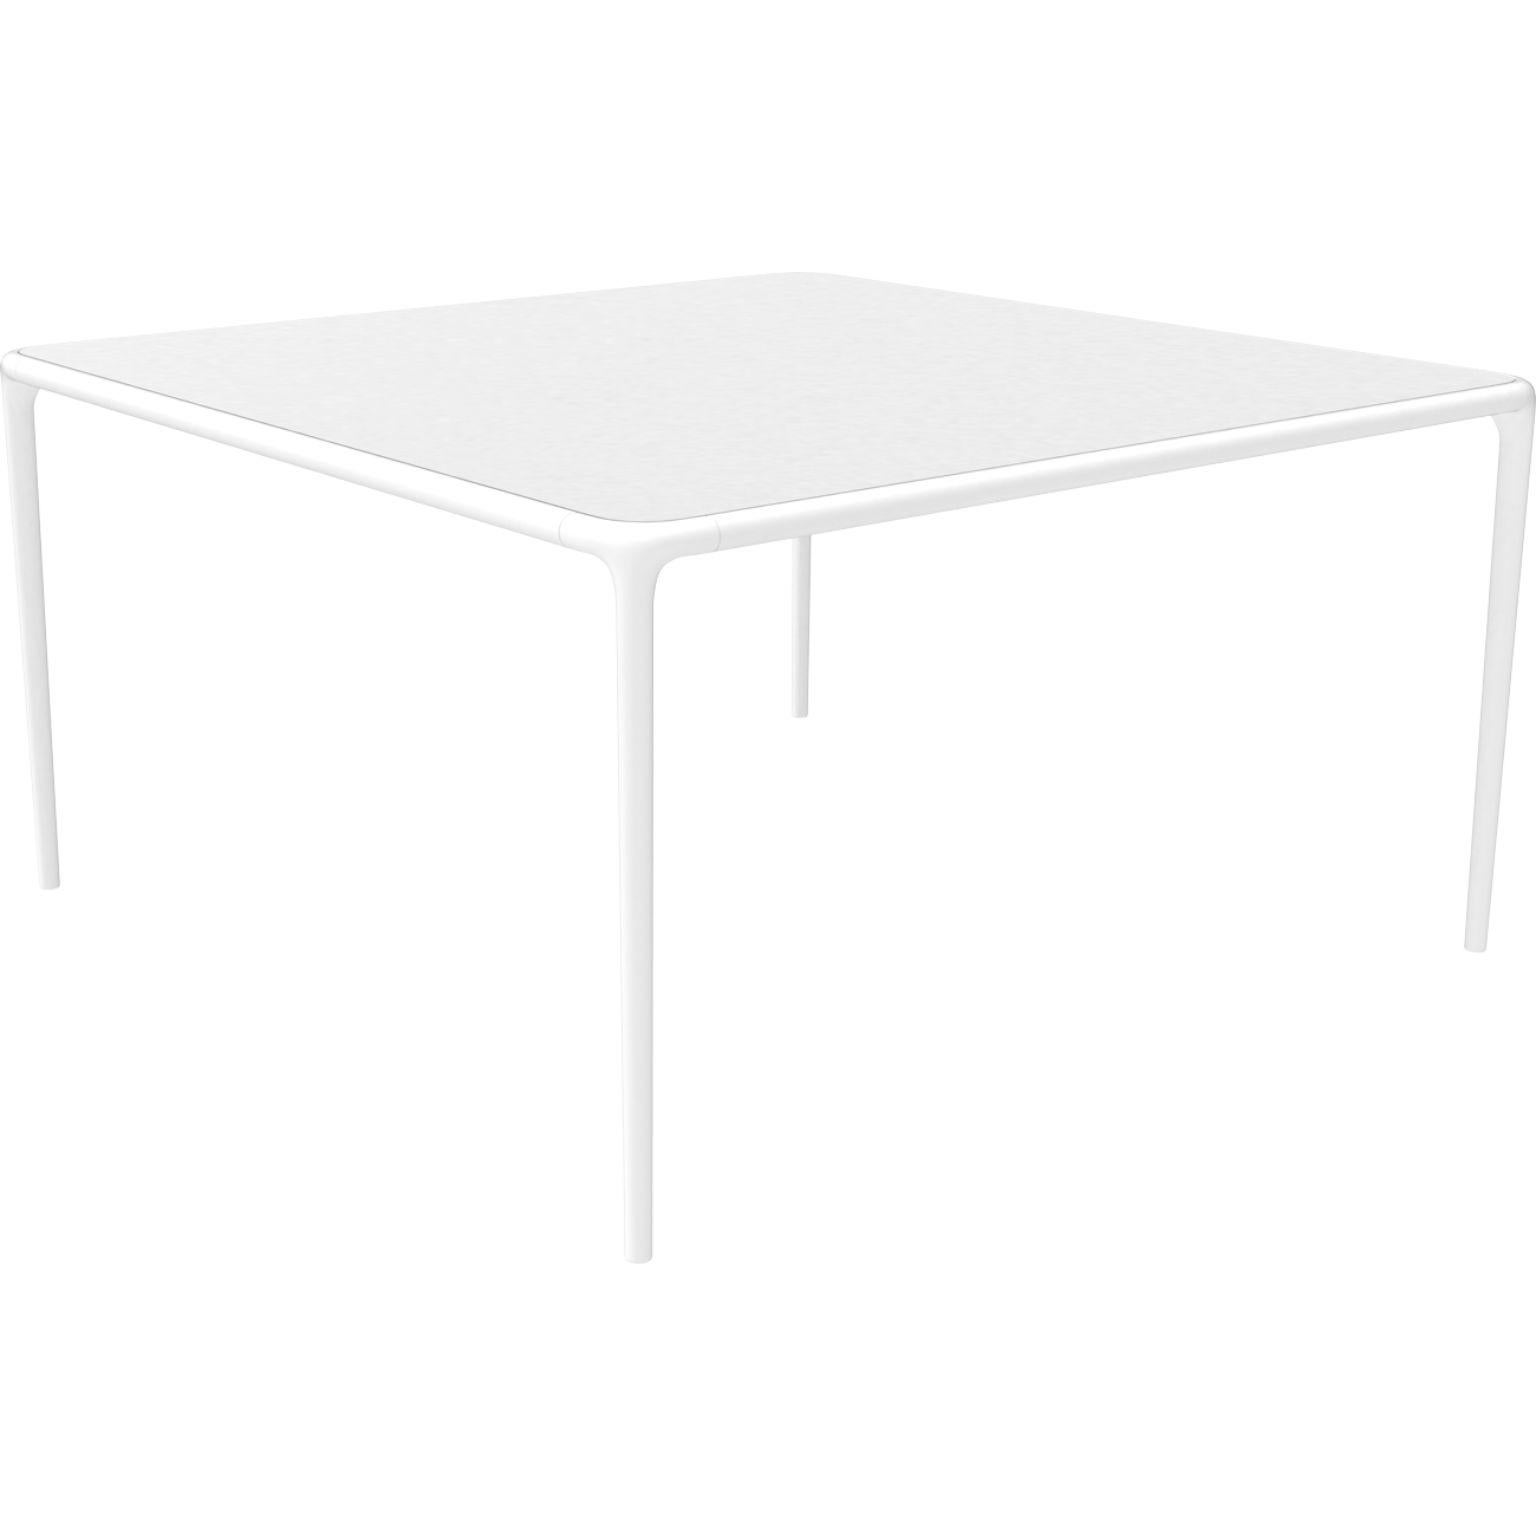 Xaloc white glass top table 140 by MOWEE
Dimensions: D140 x W140 x H74 cm
Material: Aluminum, tinted tempered glass top.
Also available in different aluminum colors and finishes (HPL Black Edge or Neolith). 

Xaloc synthesizes the lines of